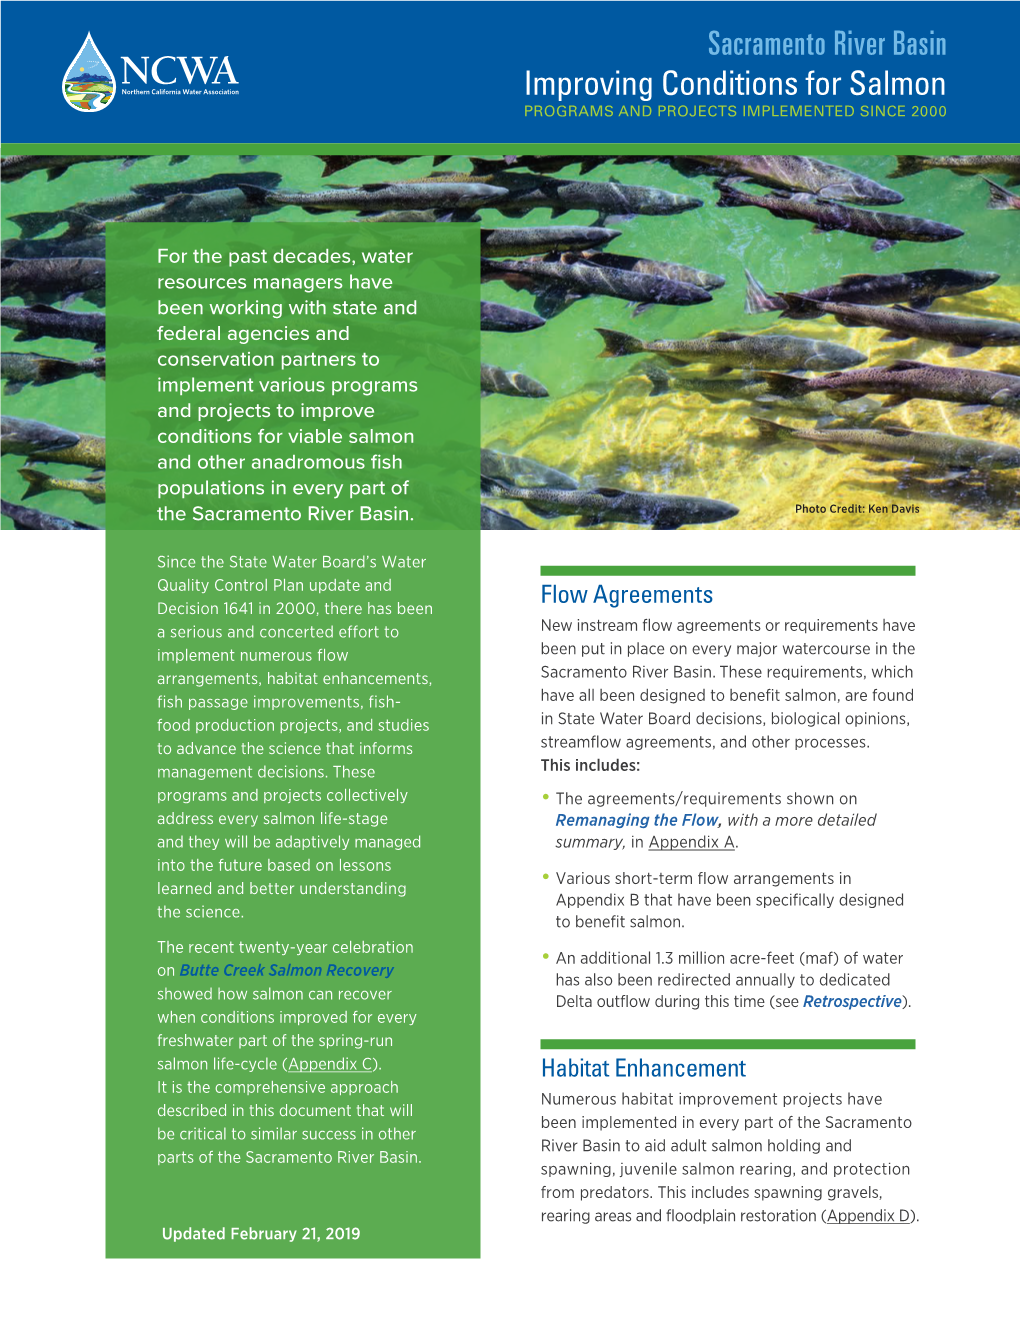 Sacramento River Basin Improving Conditions for Salmon PROGRAMS and PROJECTS IMPLEMENTED SINCE 2000